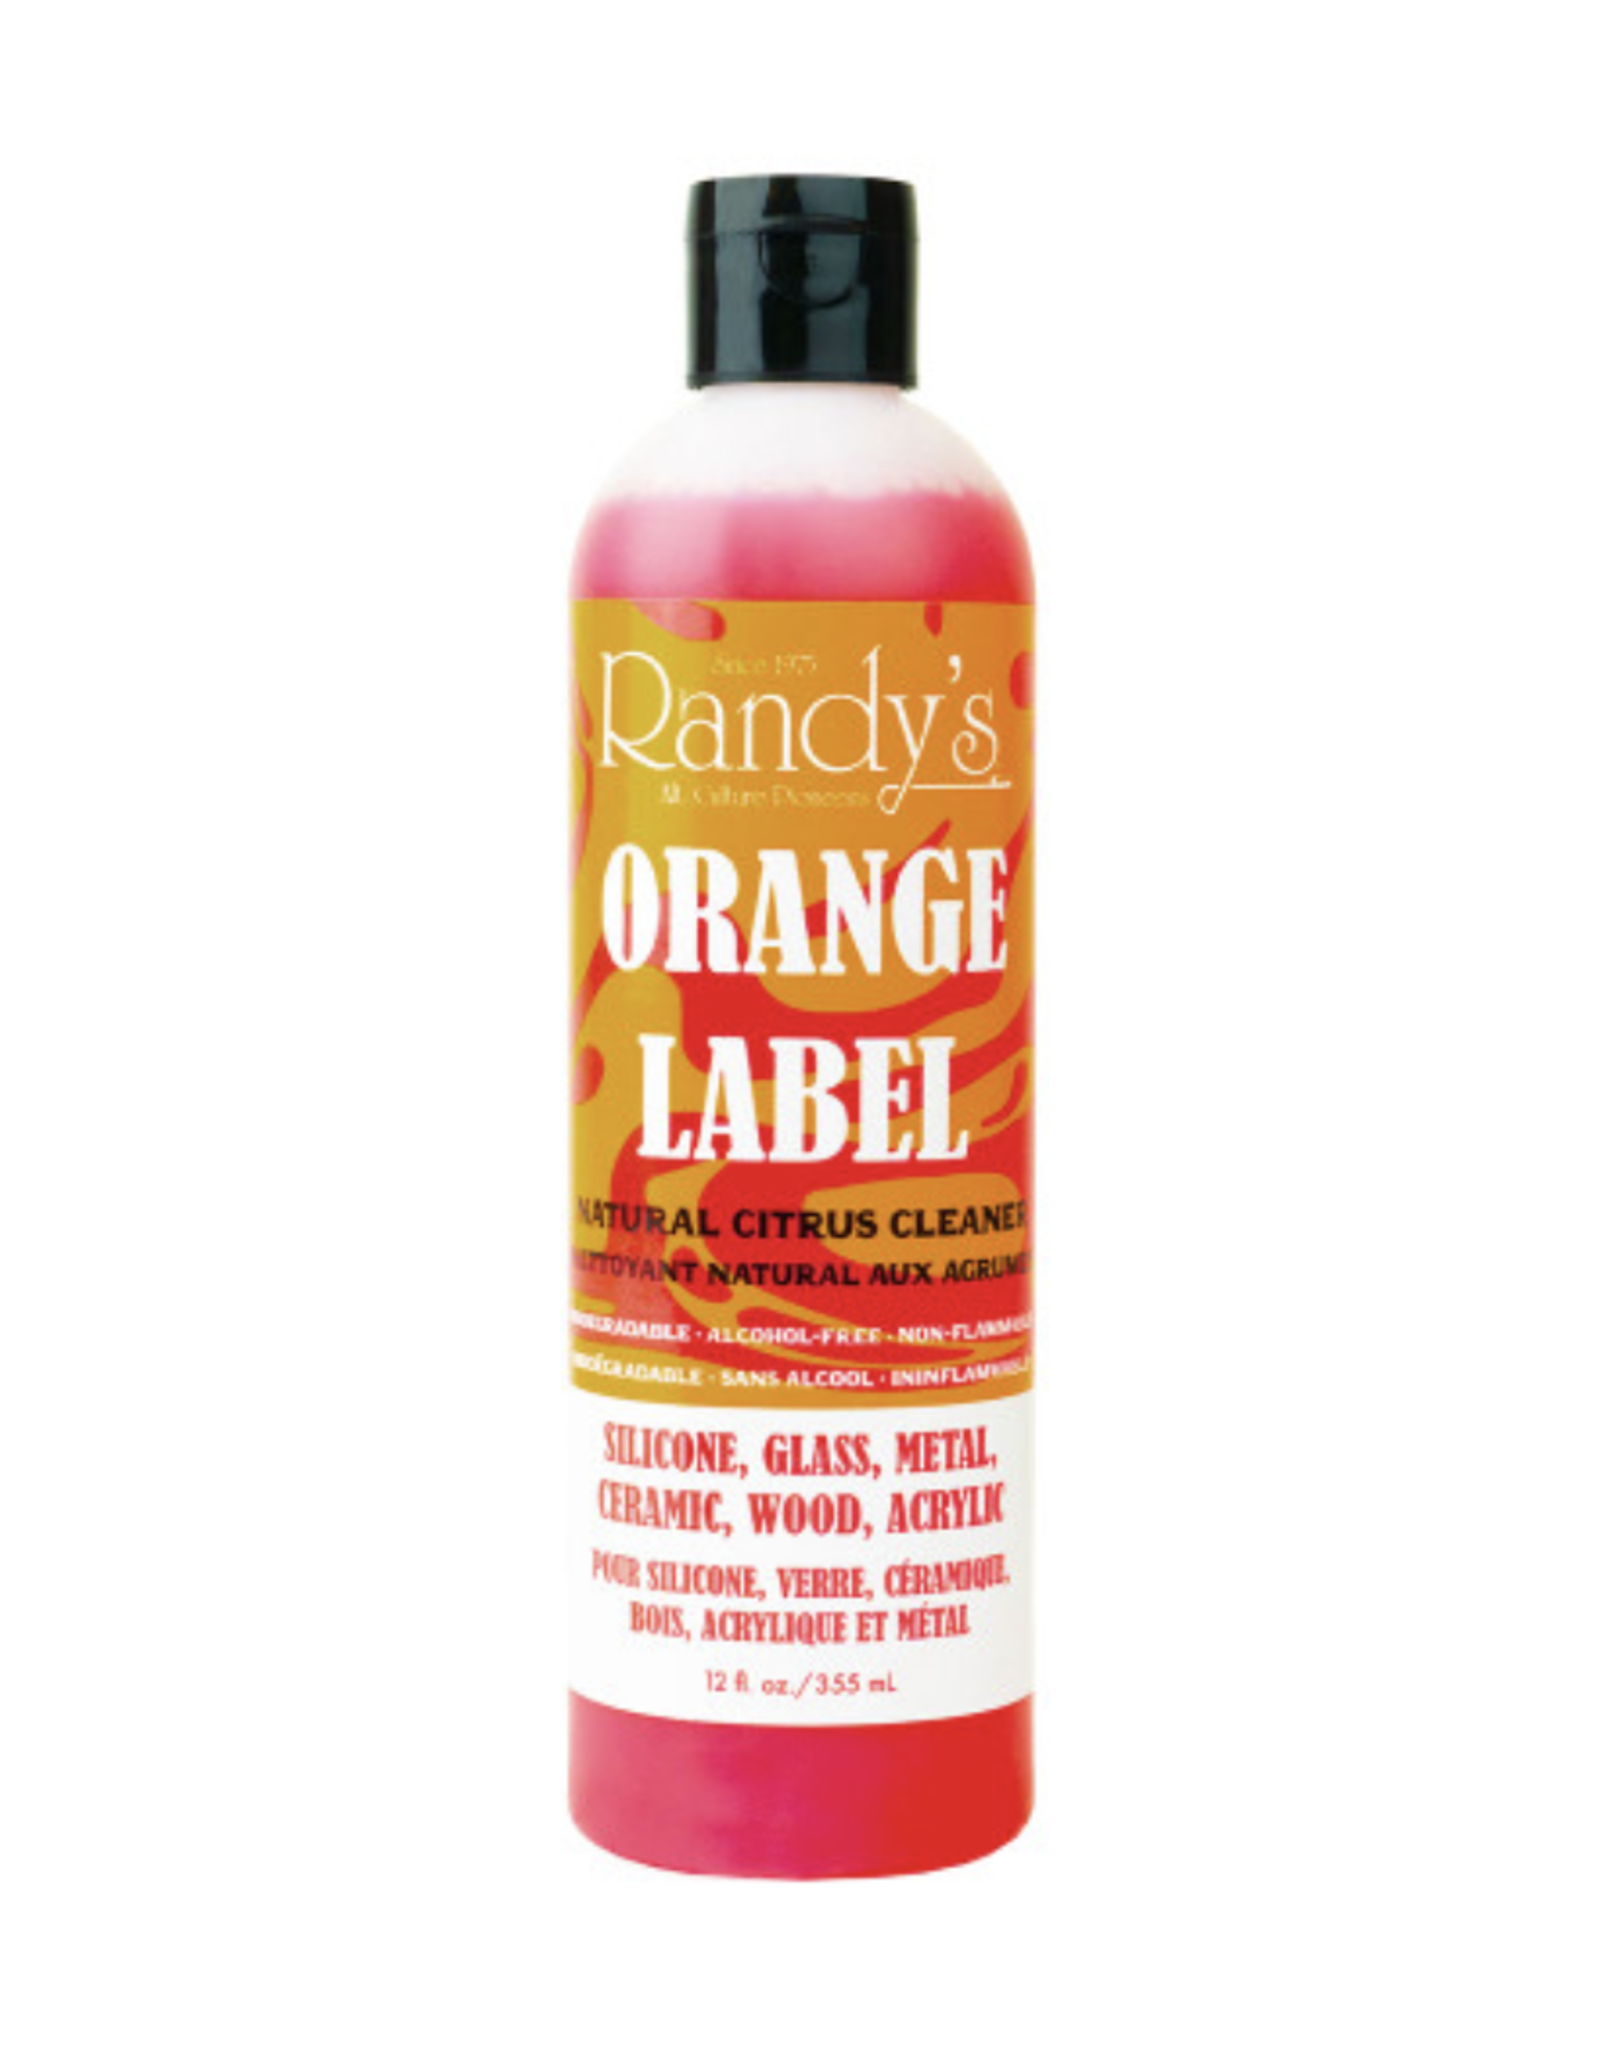 Randy's Randy's Orange Label Cleaner 12oz *Not Available for Shipping*